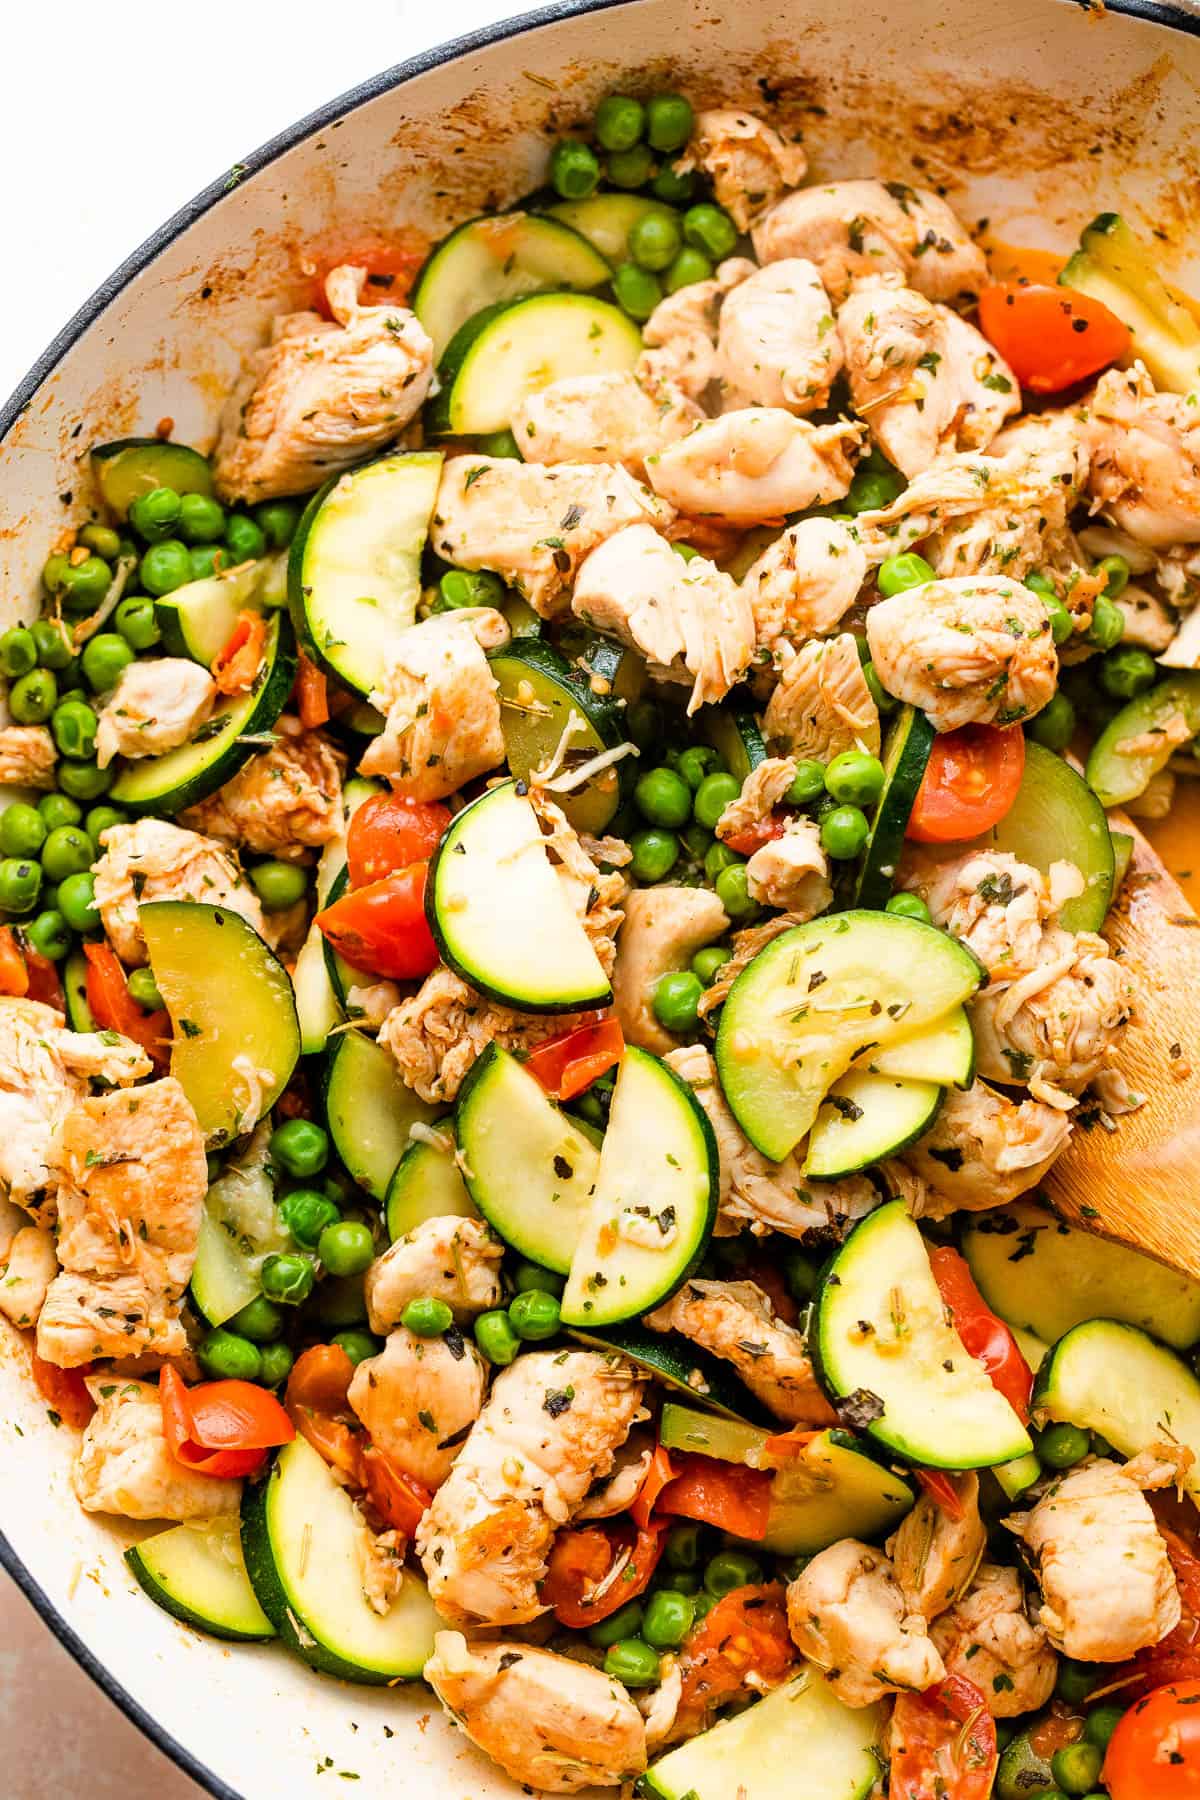 chicken bites, zucchini slices, peas, and tomatoes cooking in a skillet